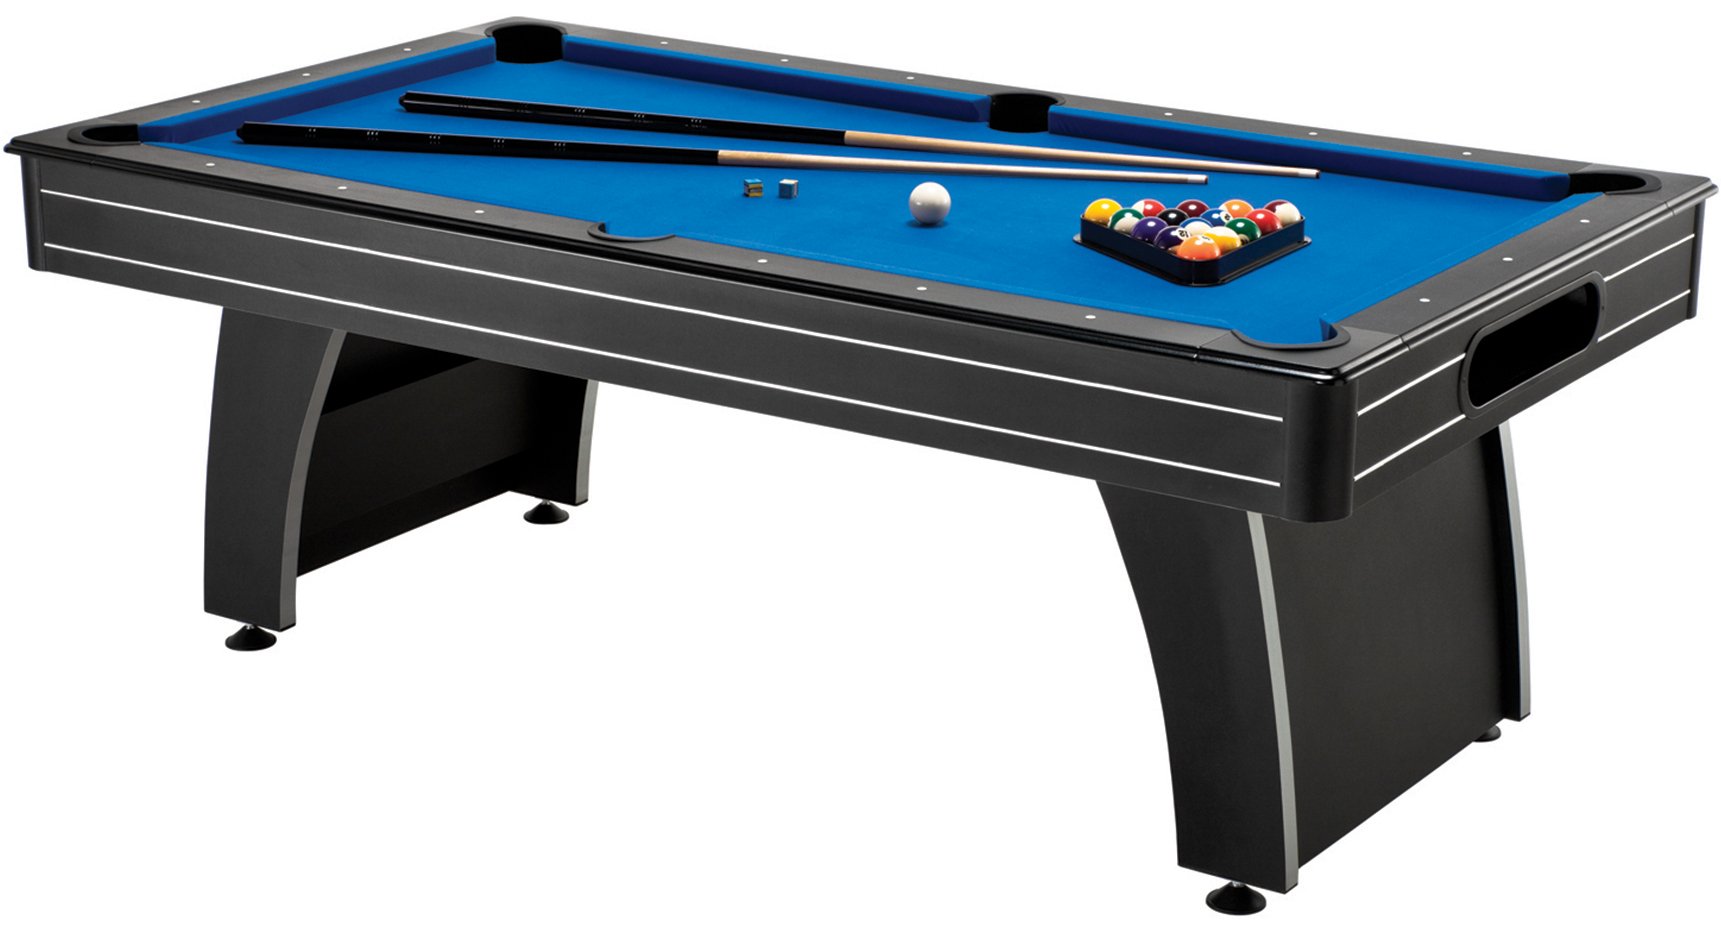 Fat Cat by GLD PRODUCTS Tucson 7’ Pool Table with Automatic Ball Return, Electric Blue Playing Surface & Included Billiard Accessories to Play Out of The Boxington 9 ft. Allendale Collection Shuffleboard Table